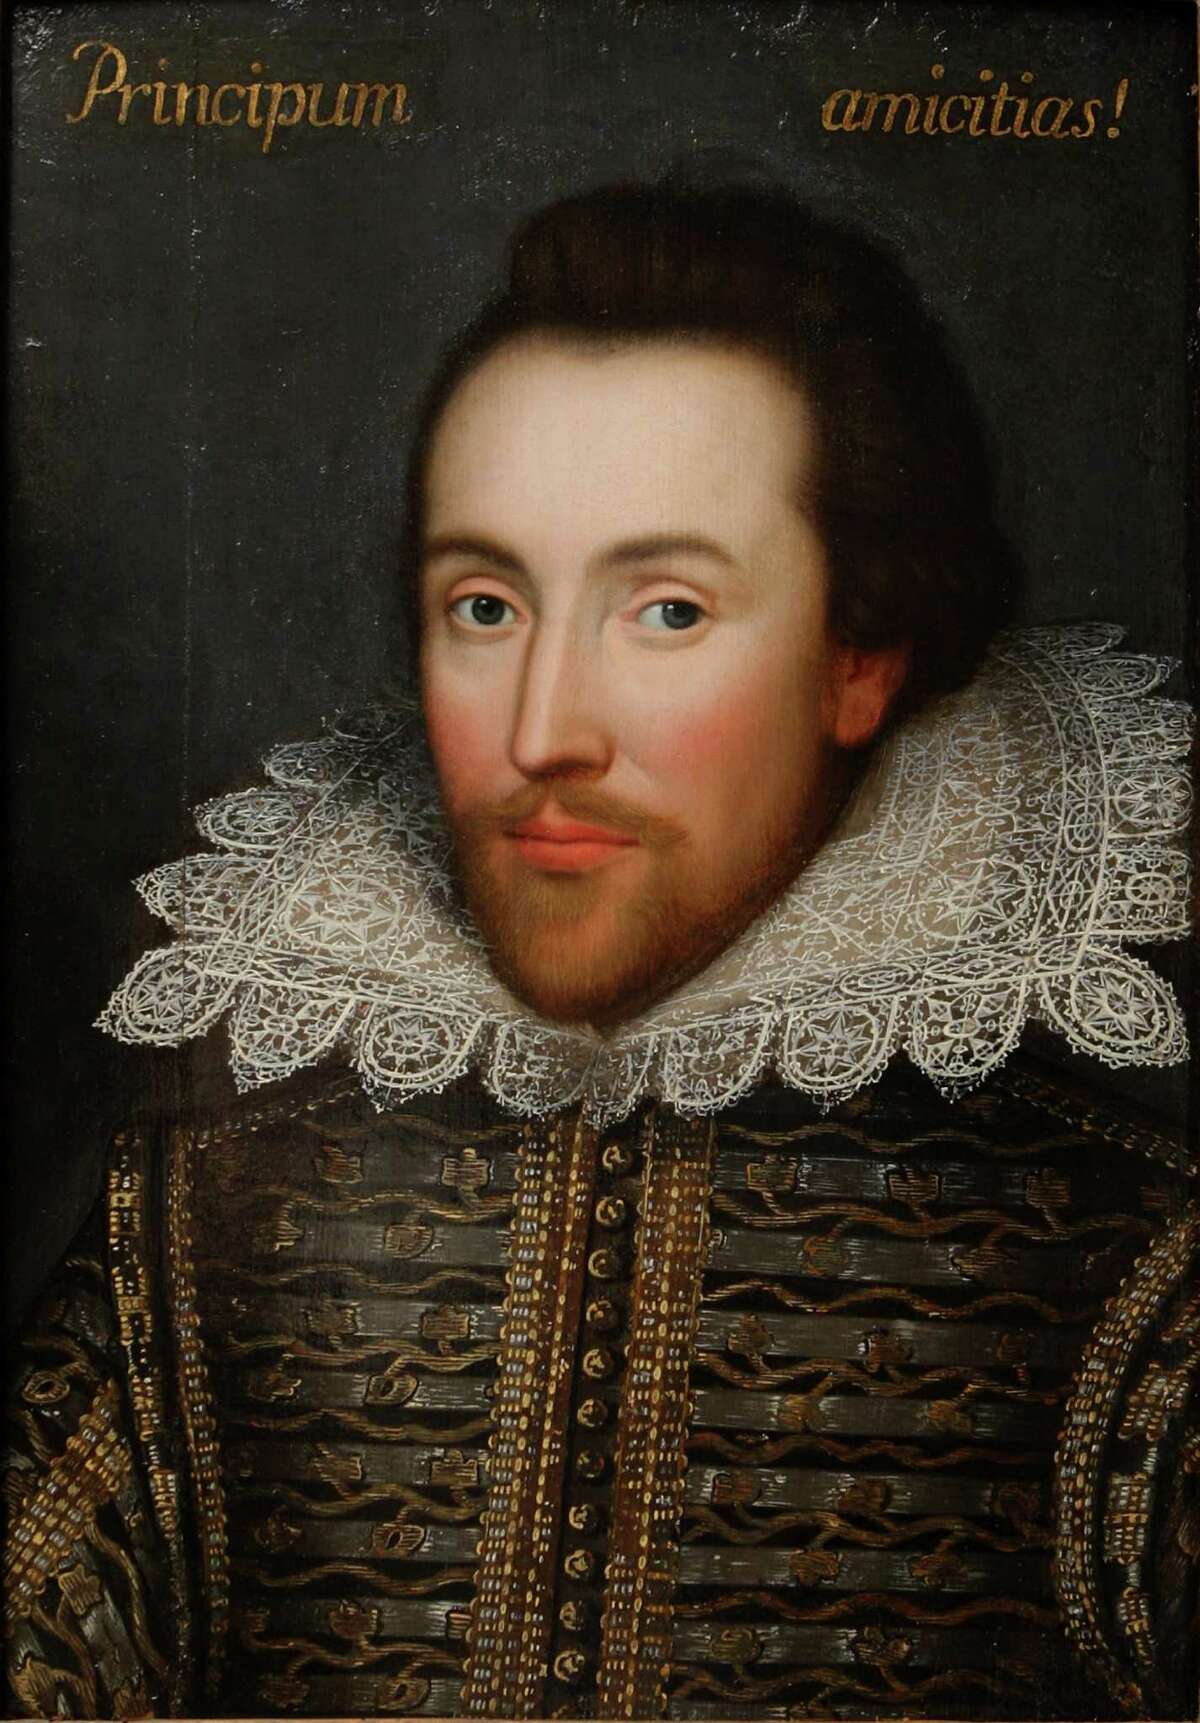 William Shakespeare was baptized on April 26, 1564 and died April 23, 1616 … suffice it to say, those were some fairly productive years for this particular human being. To celebrate this auspicious week, we’ve hunted down some surprising moments of mostly famous people performing or rehearsing his plays (or those plays and movies that were derived from his work). We also interspersed the various images of the playwright and poet. The one above is considered to be the one most like the man (more about the portrait in the last slide ... on with the fun). Happy Shakespeare week!